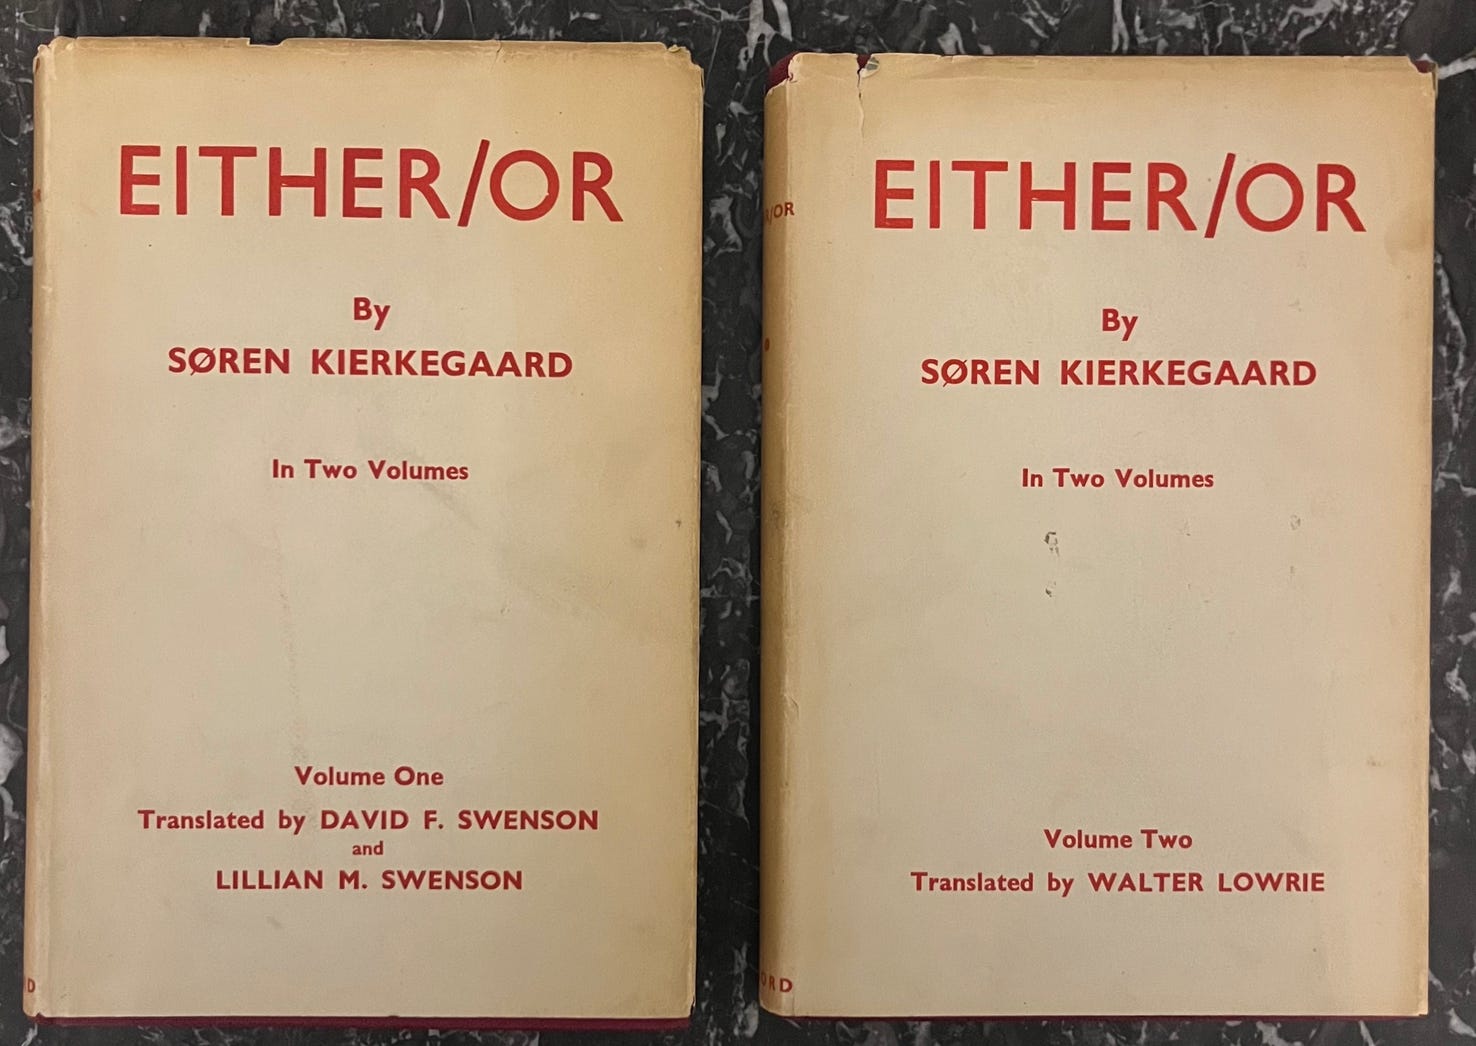 A photo of Kierkegaard's Either/Or